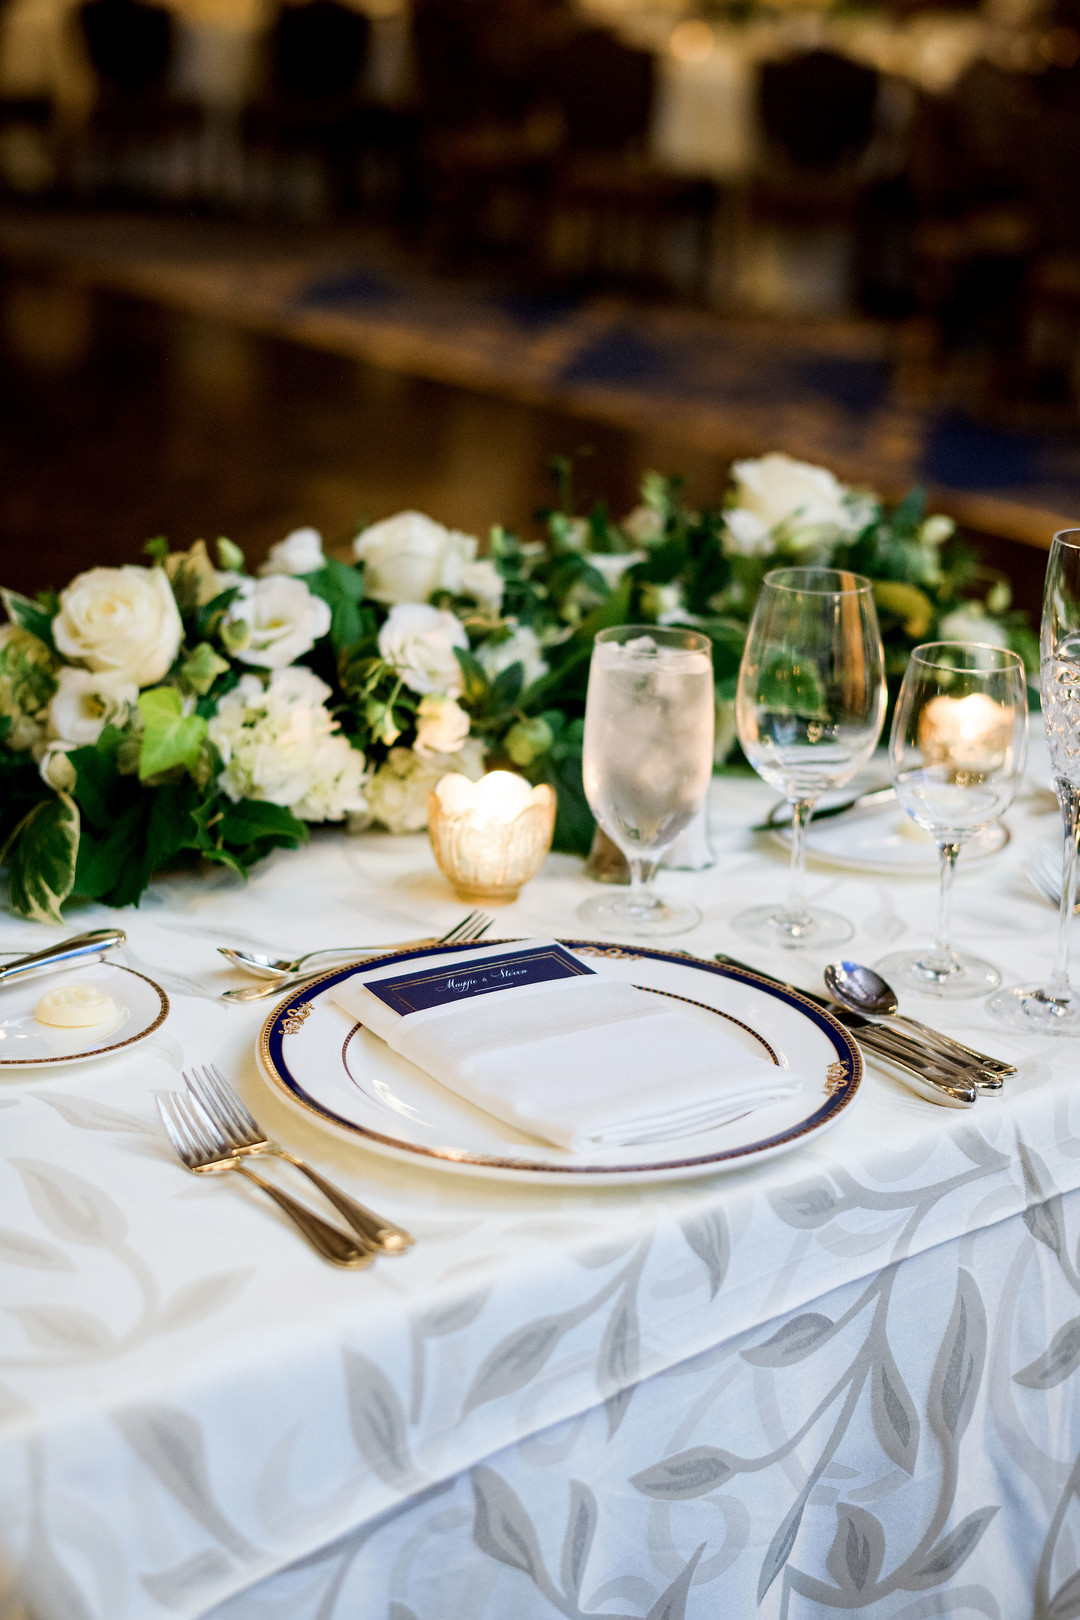 Romantic Chicago Fall Wedding at Union League Club of Chicago captured by Julia Franzosa Photography.